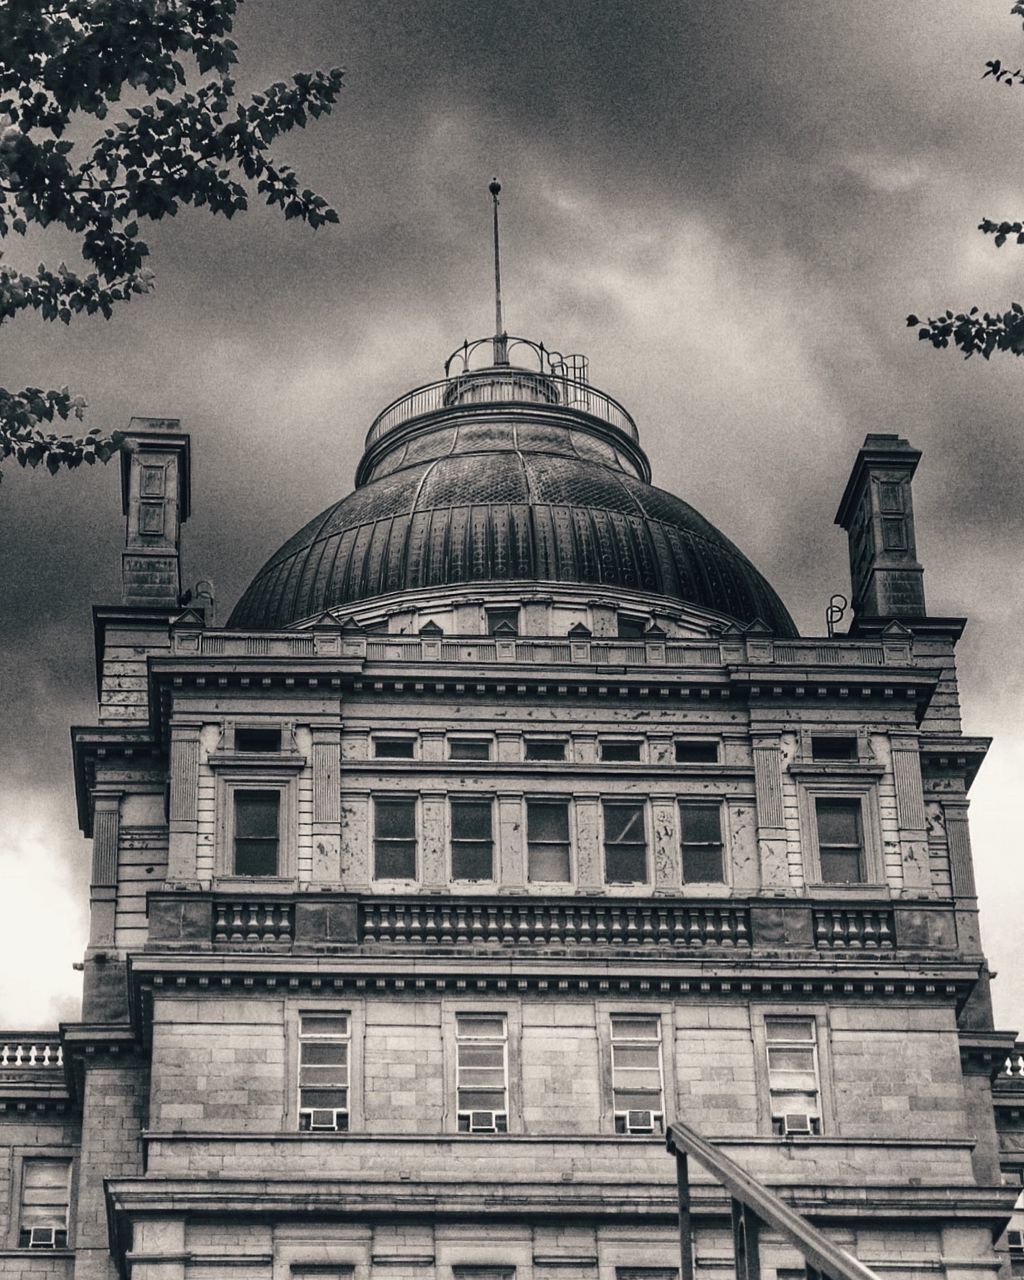 architecture, building exterior, built structure, low angle view, dome, sky, window, cloud - sky, city, cloud, cloudy, travel destinations, high section, outdoors, day, no people, history, government, famous place, city life, government building, exterior, tourism, capital cities